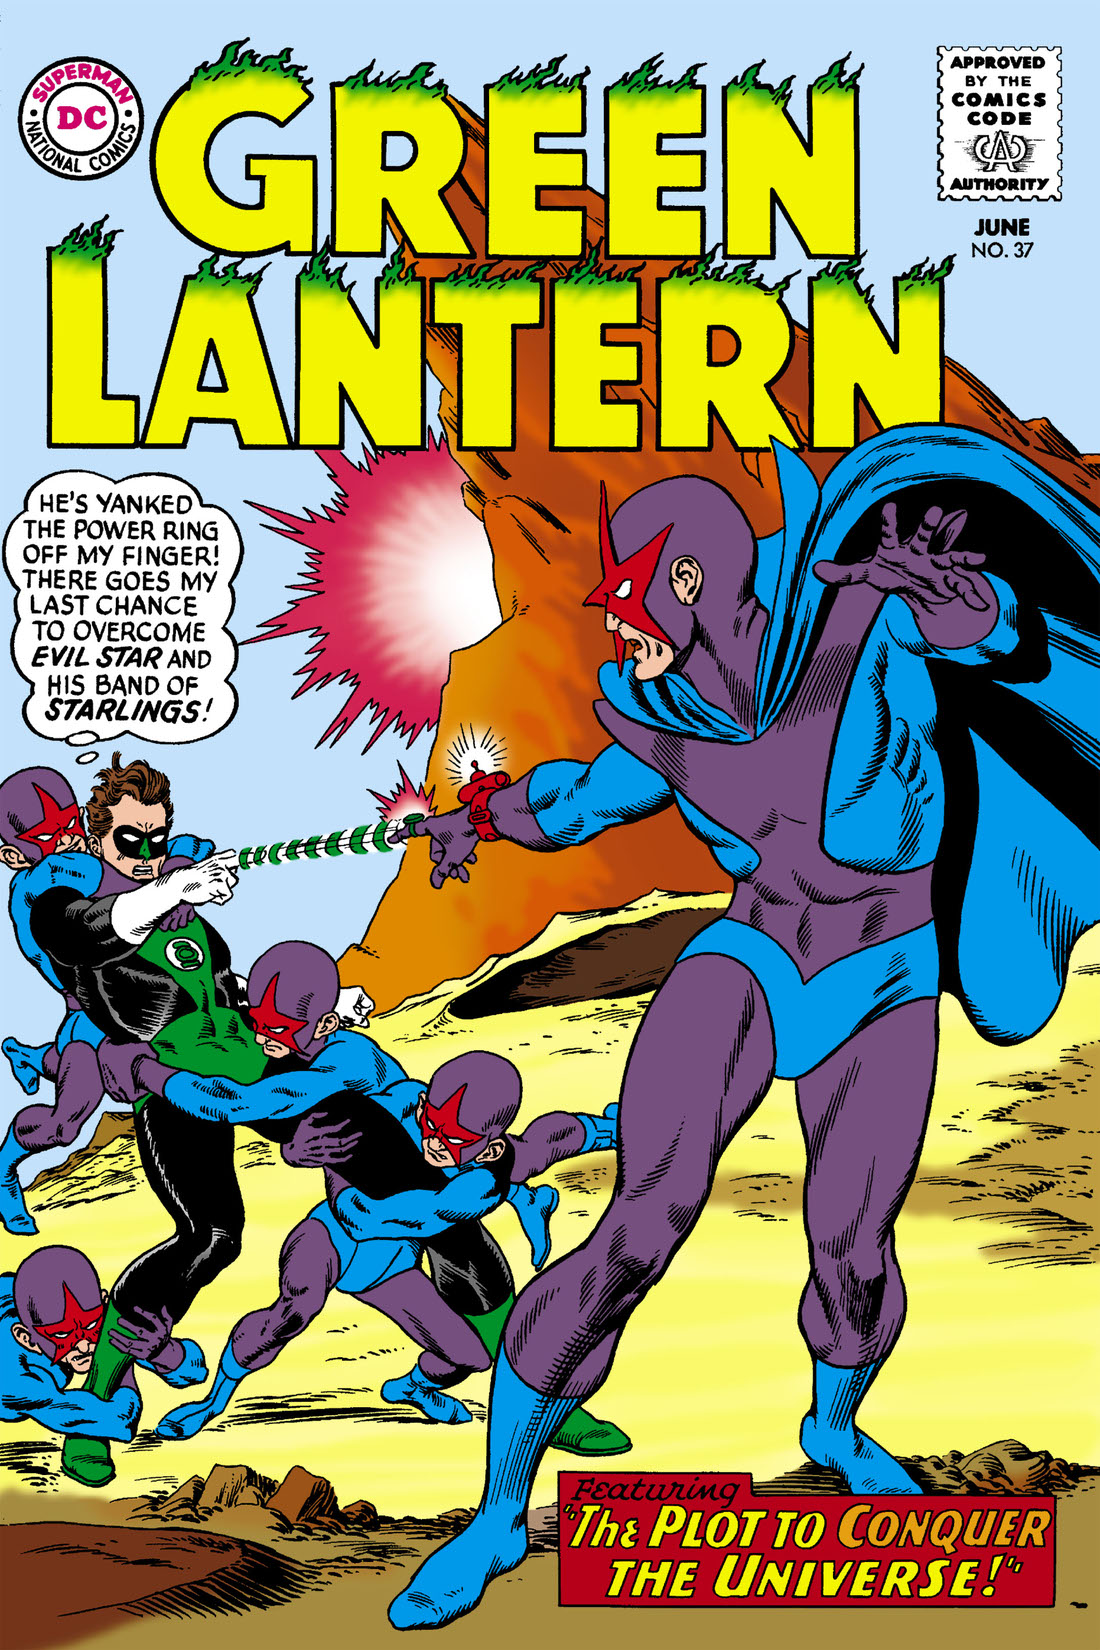 Green Lantern (1960-) #37 preview images